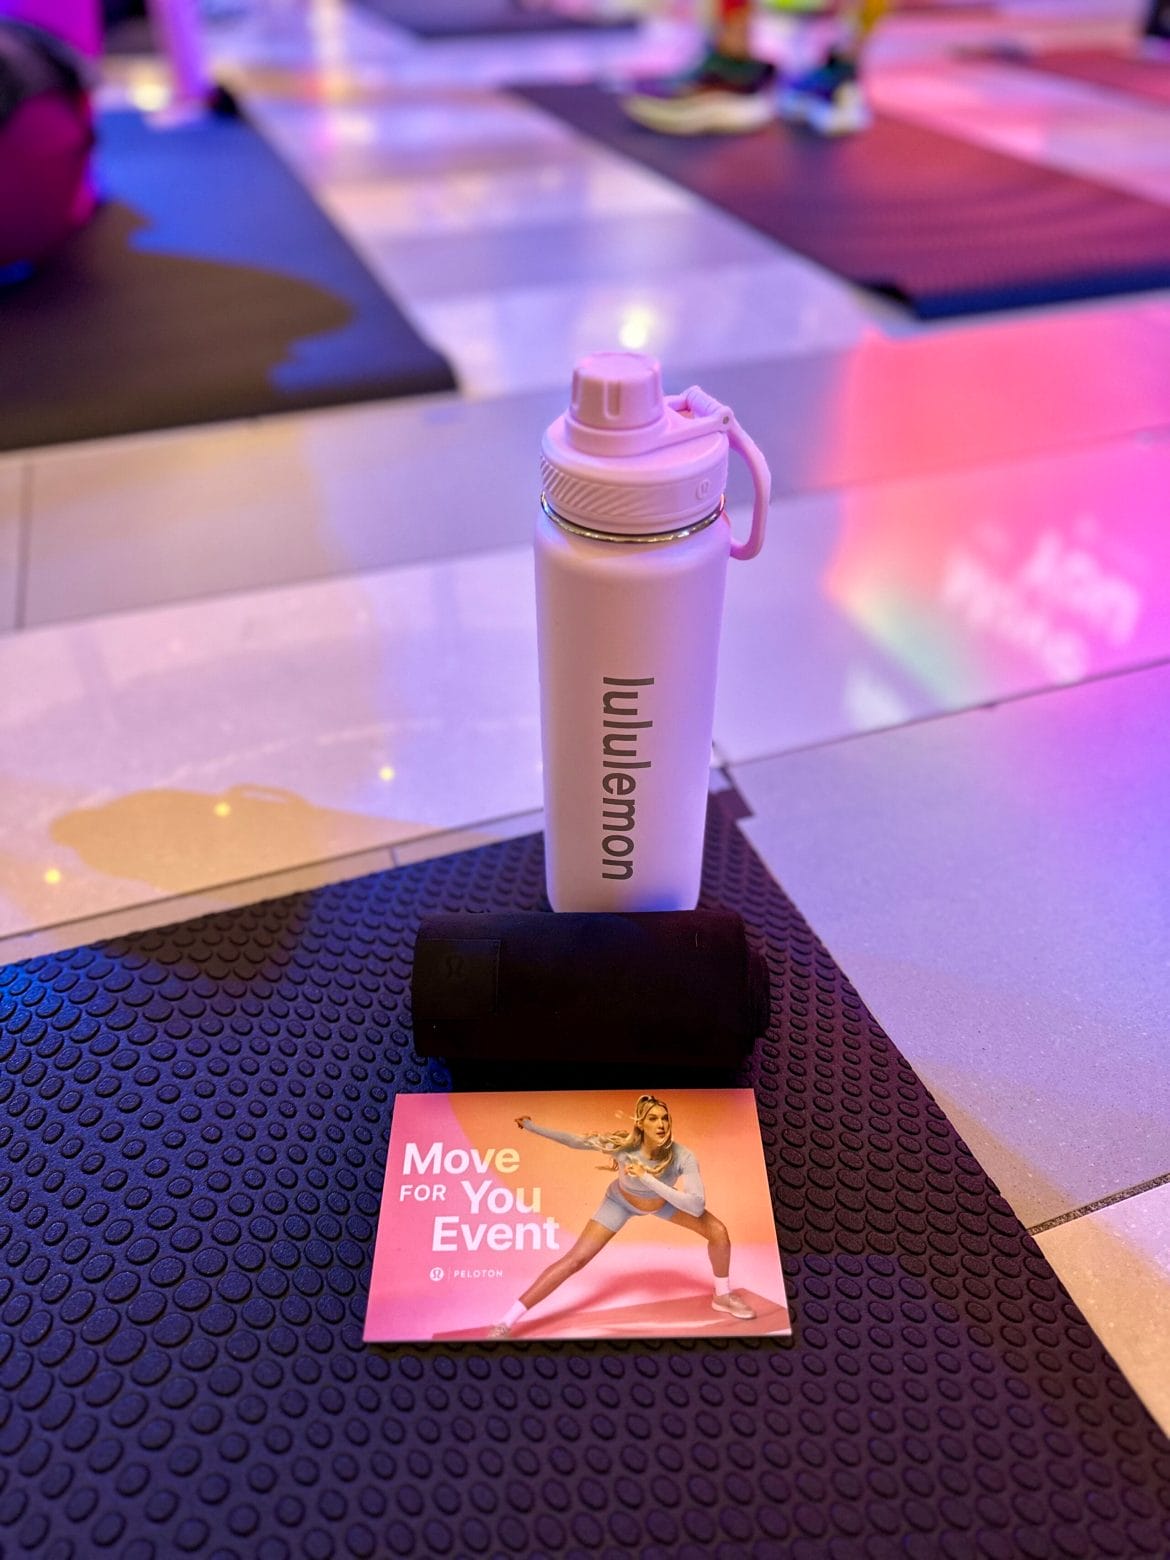 Gifts for attendees at Peloton's Move for You Mall of America classes. Image credit @shantastic.life.